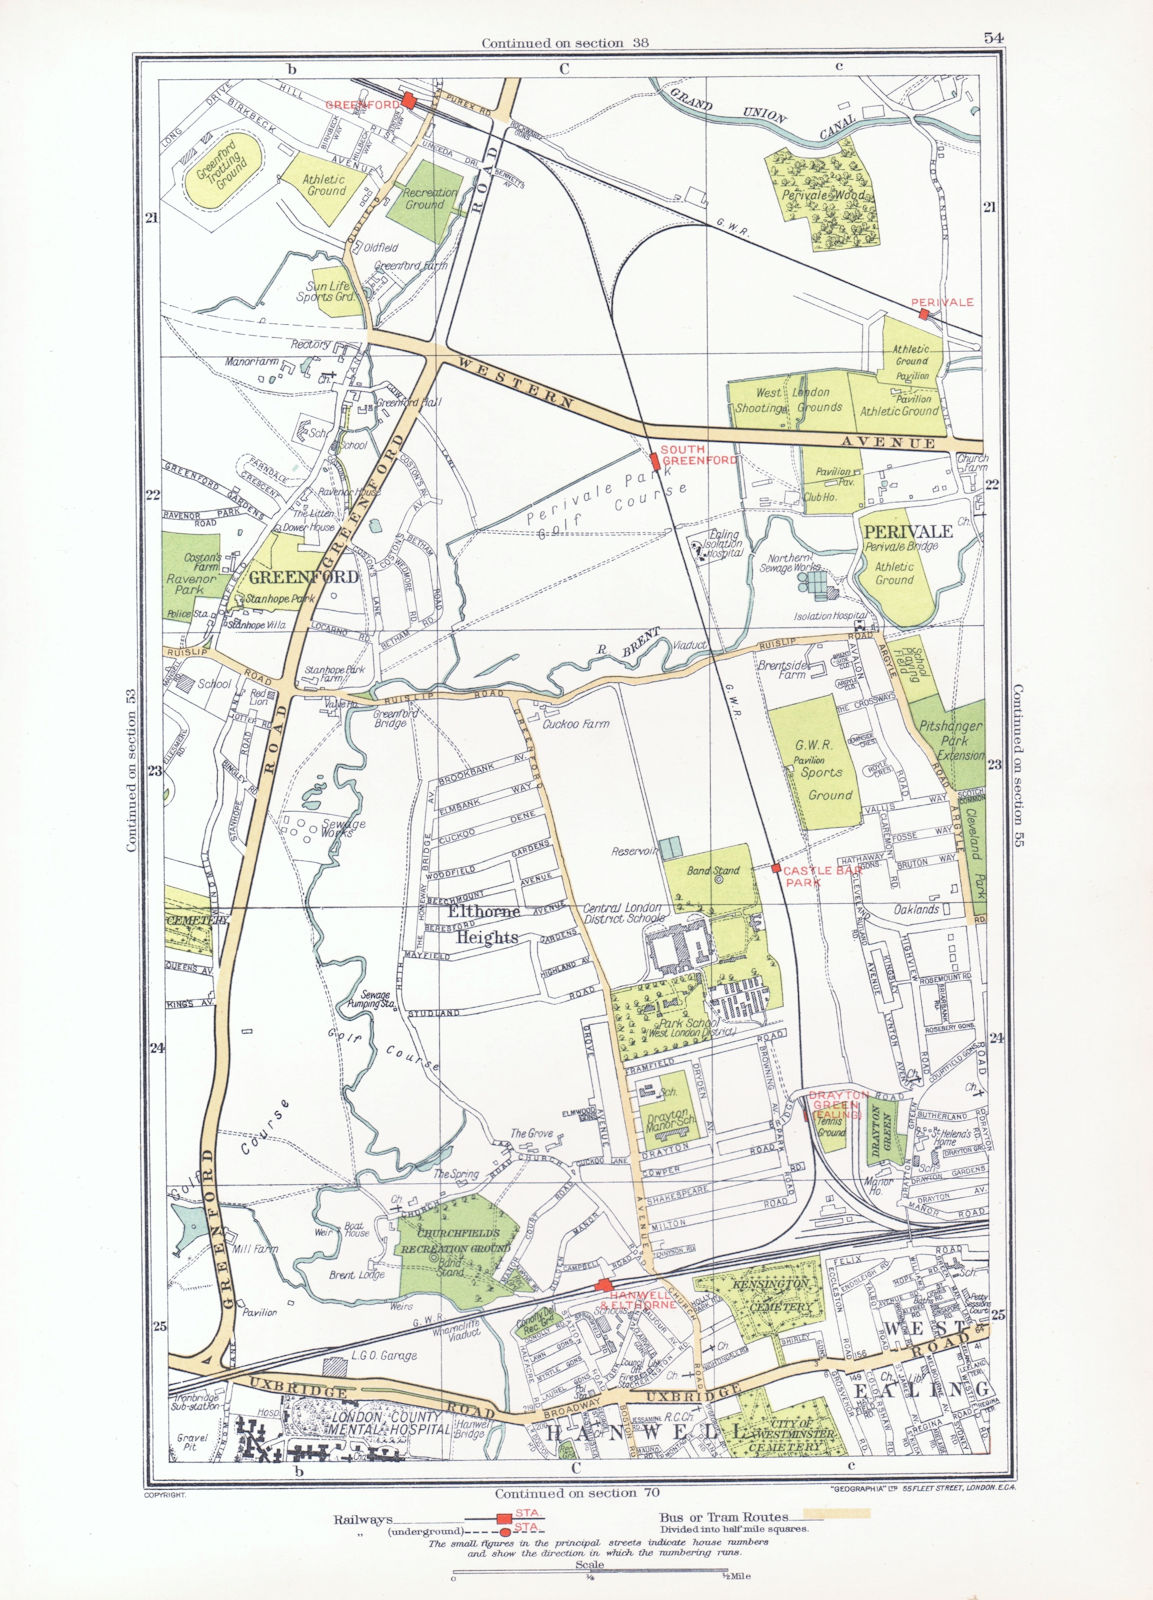 GREENFORD. Perivale West Ealing Hanwell Elthorne Heights Drayton Green 1933 map